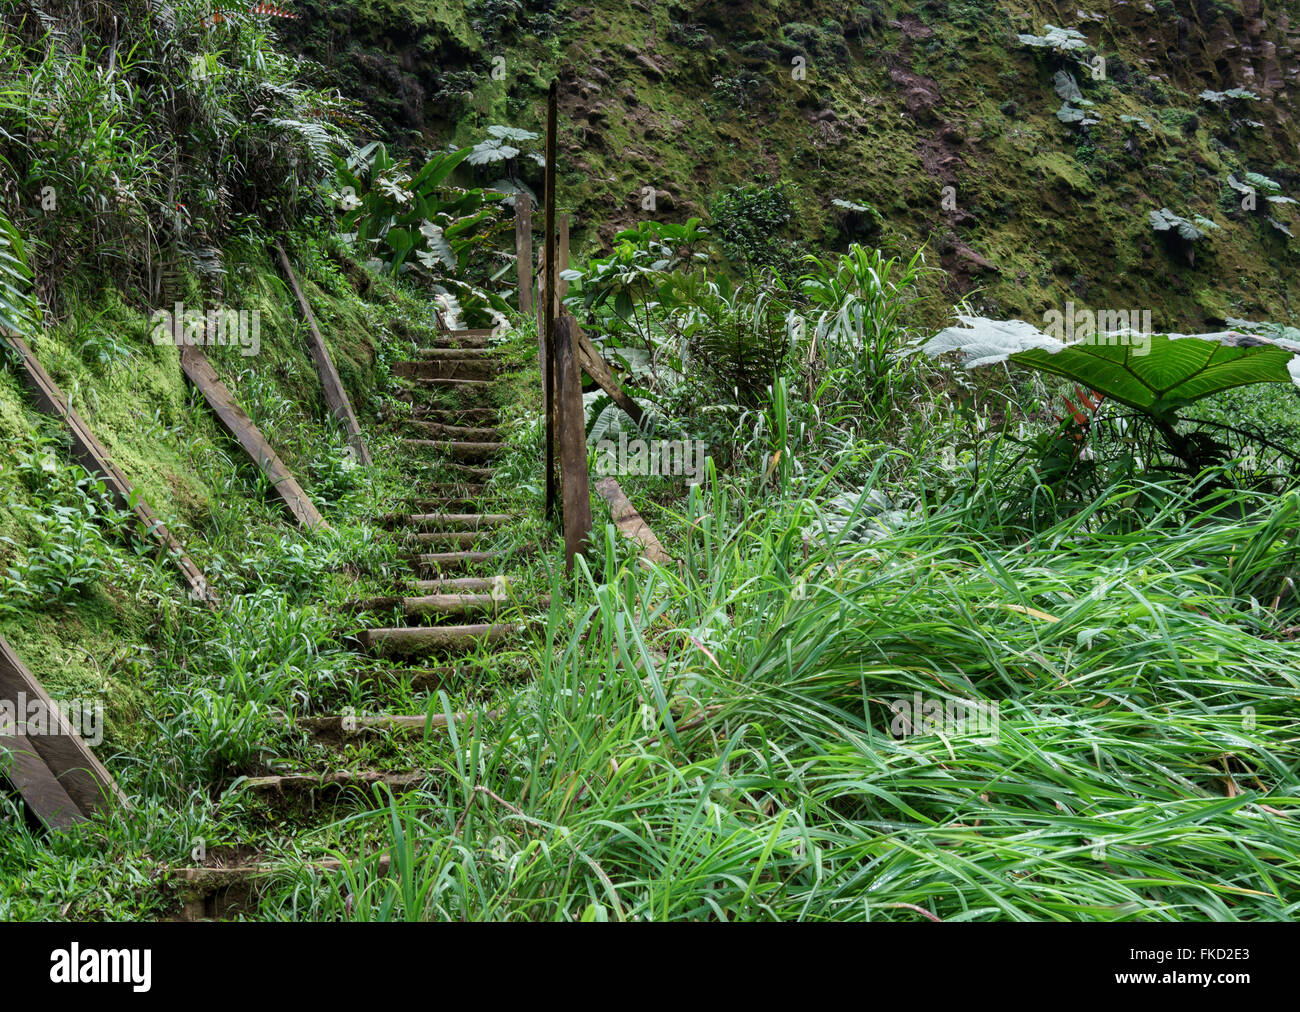 Green grass in a tropical forest, Costa Rica Stock Photo